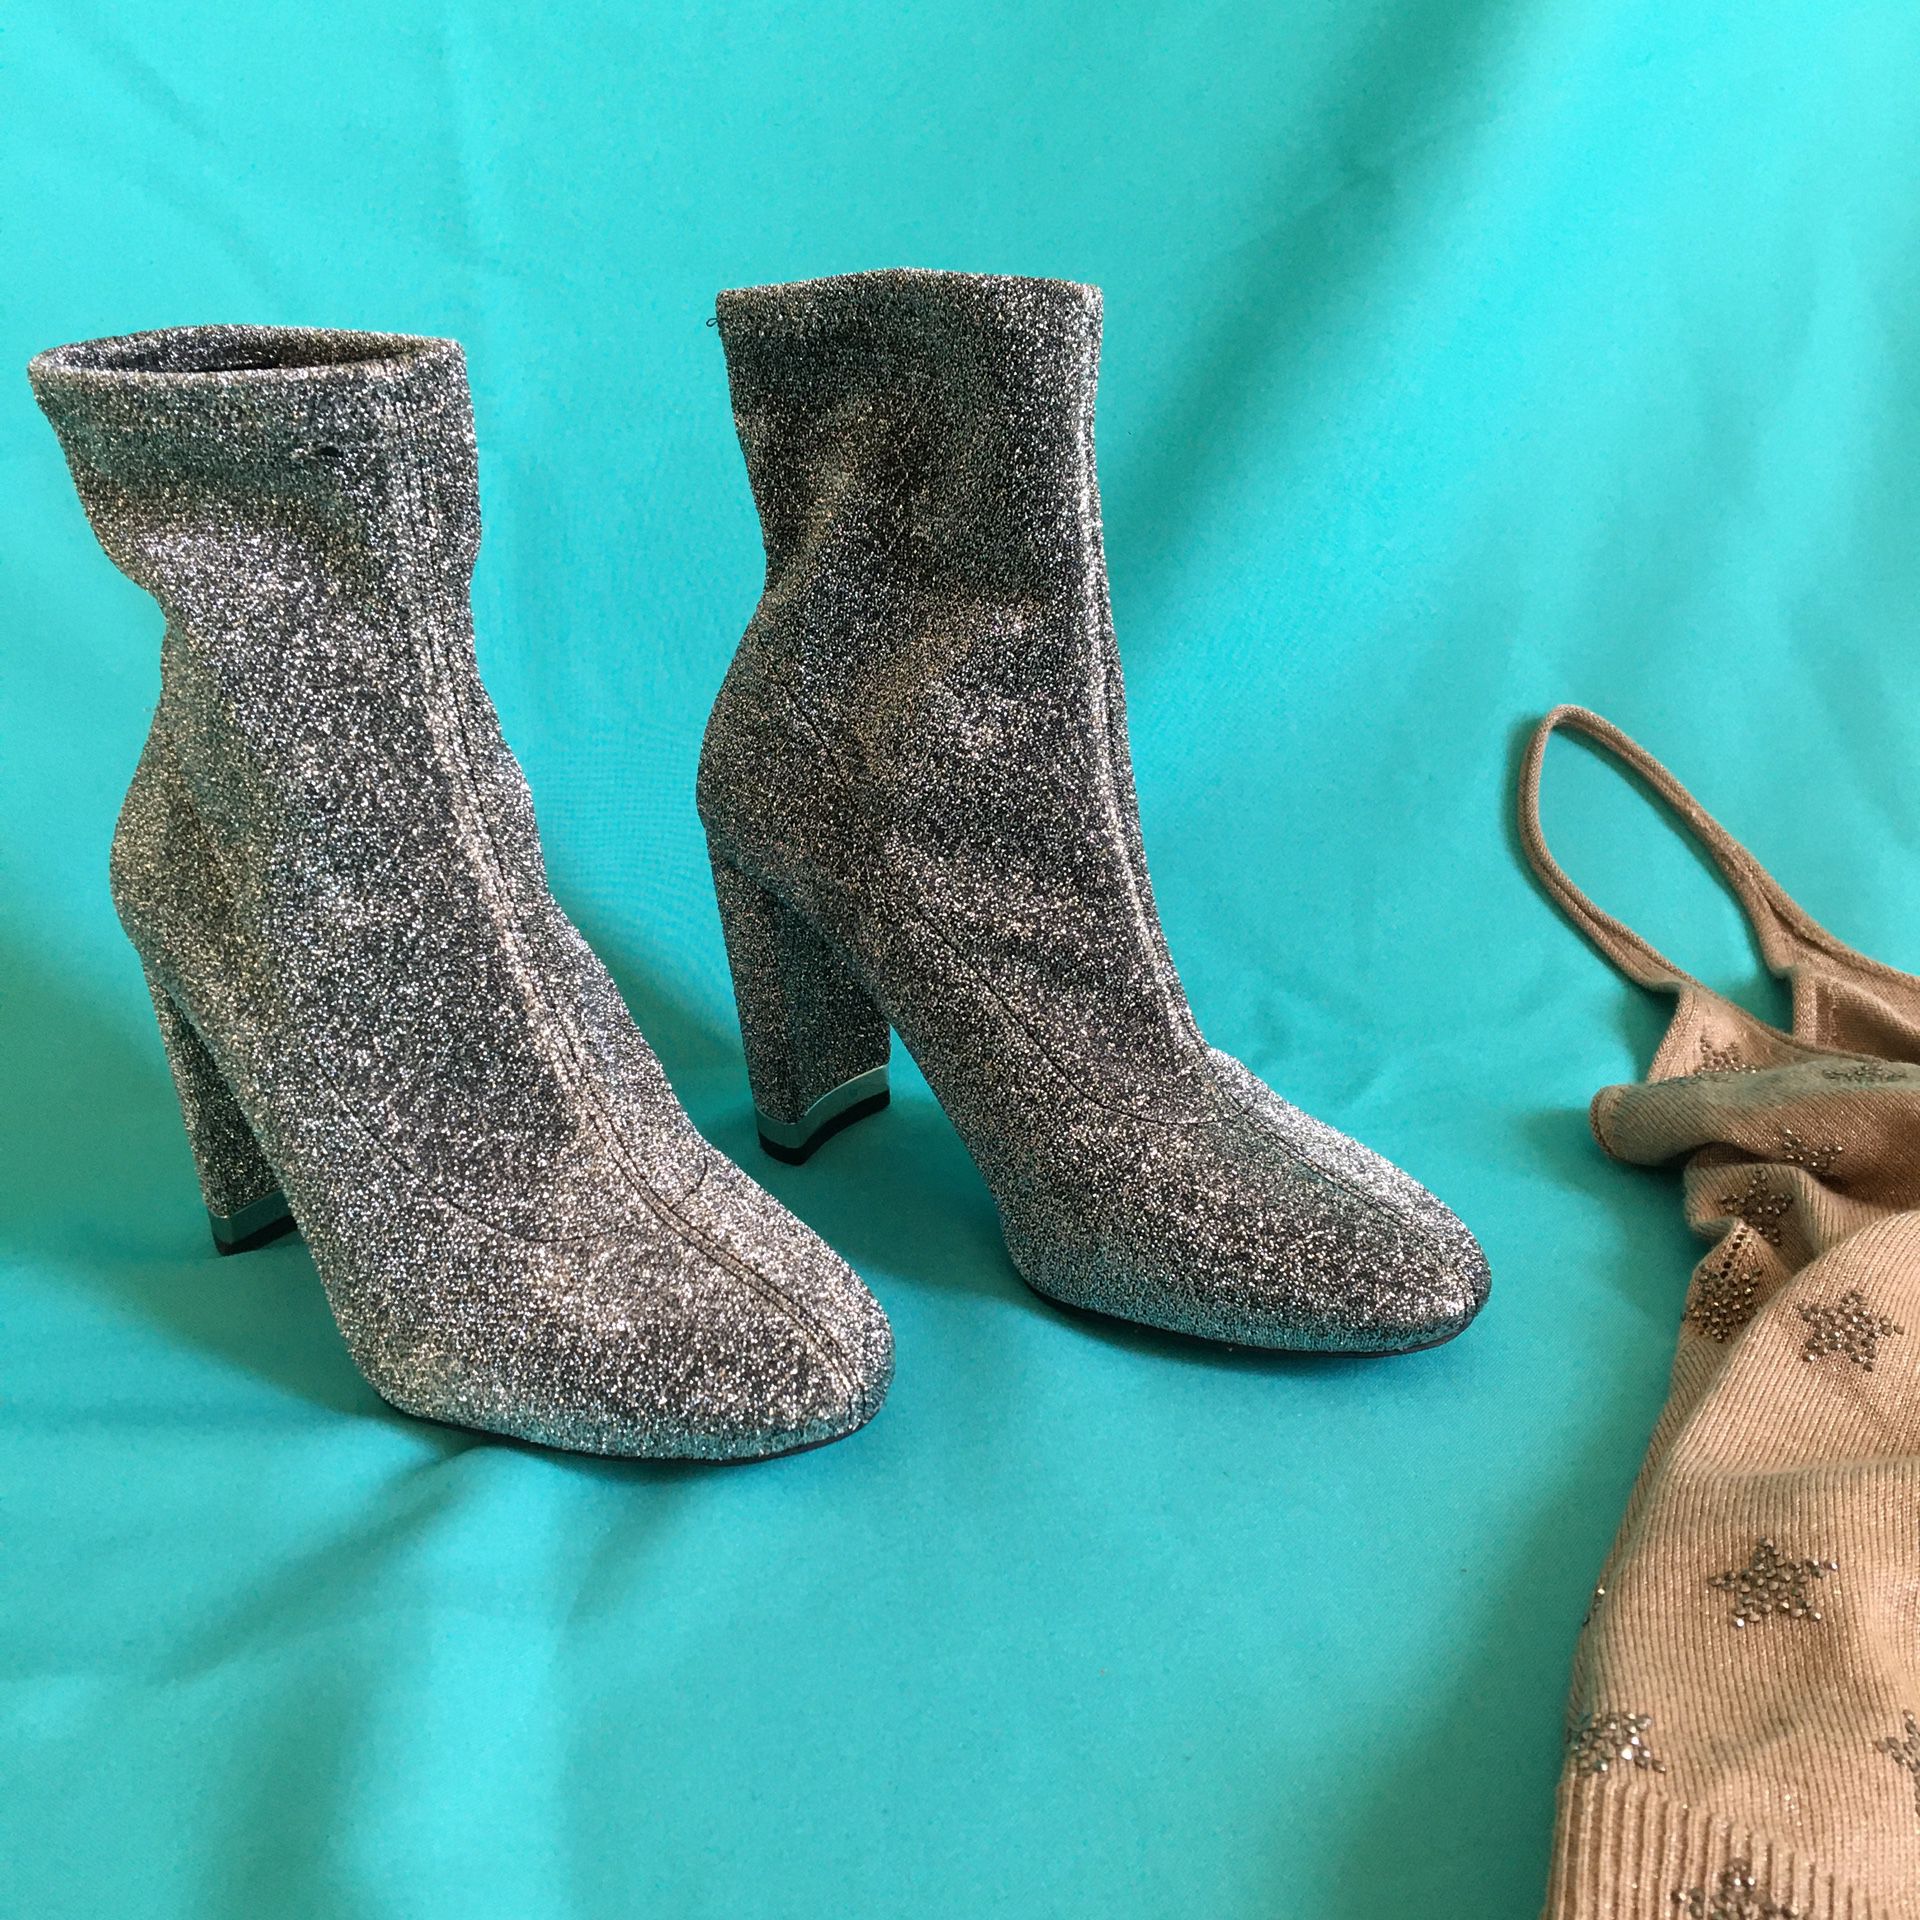 Michael Kors Mandy stretch ankle sock boot in glitter silver sz 7.5